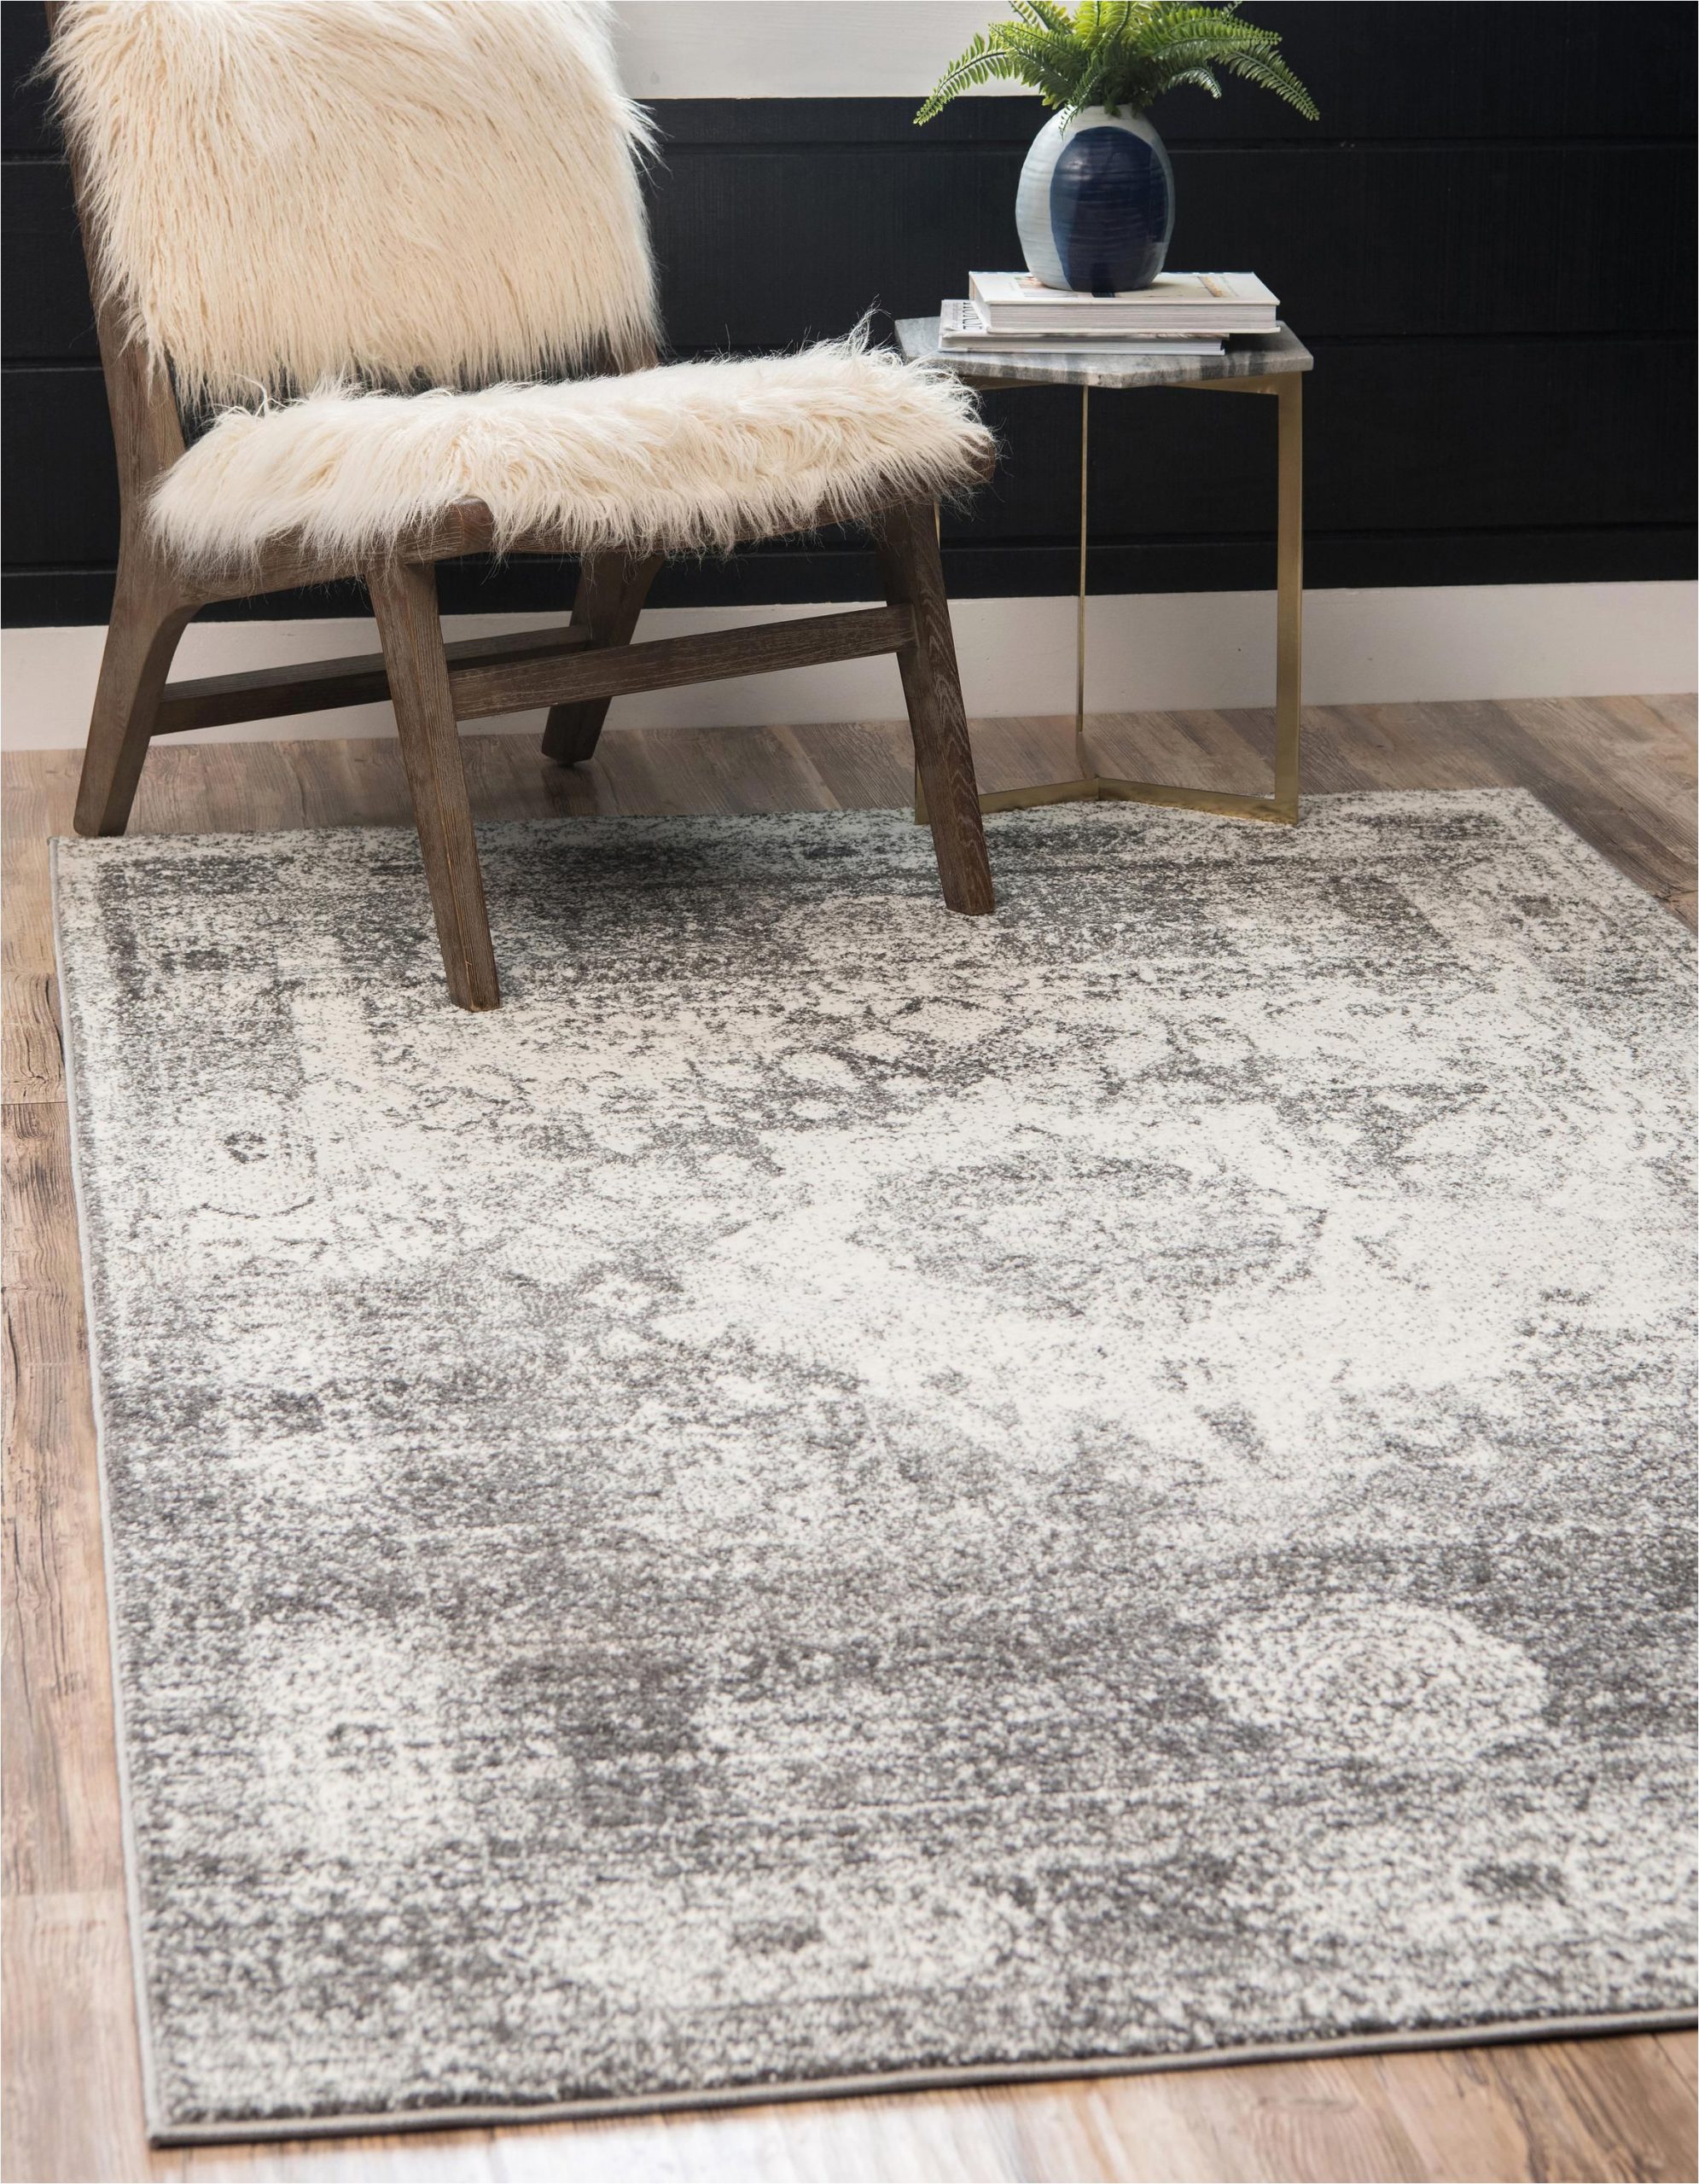 Large Grey and White area Rug Gray 4 X 6 Brighella Rug Rugs